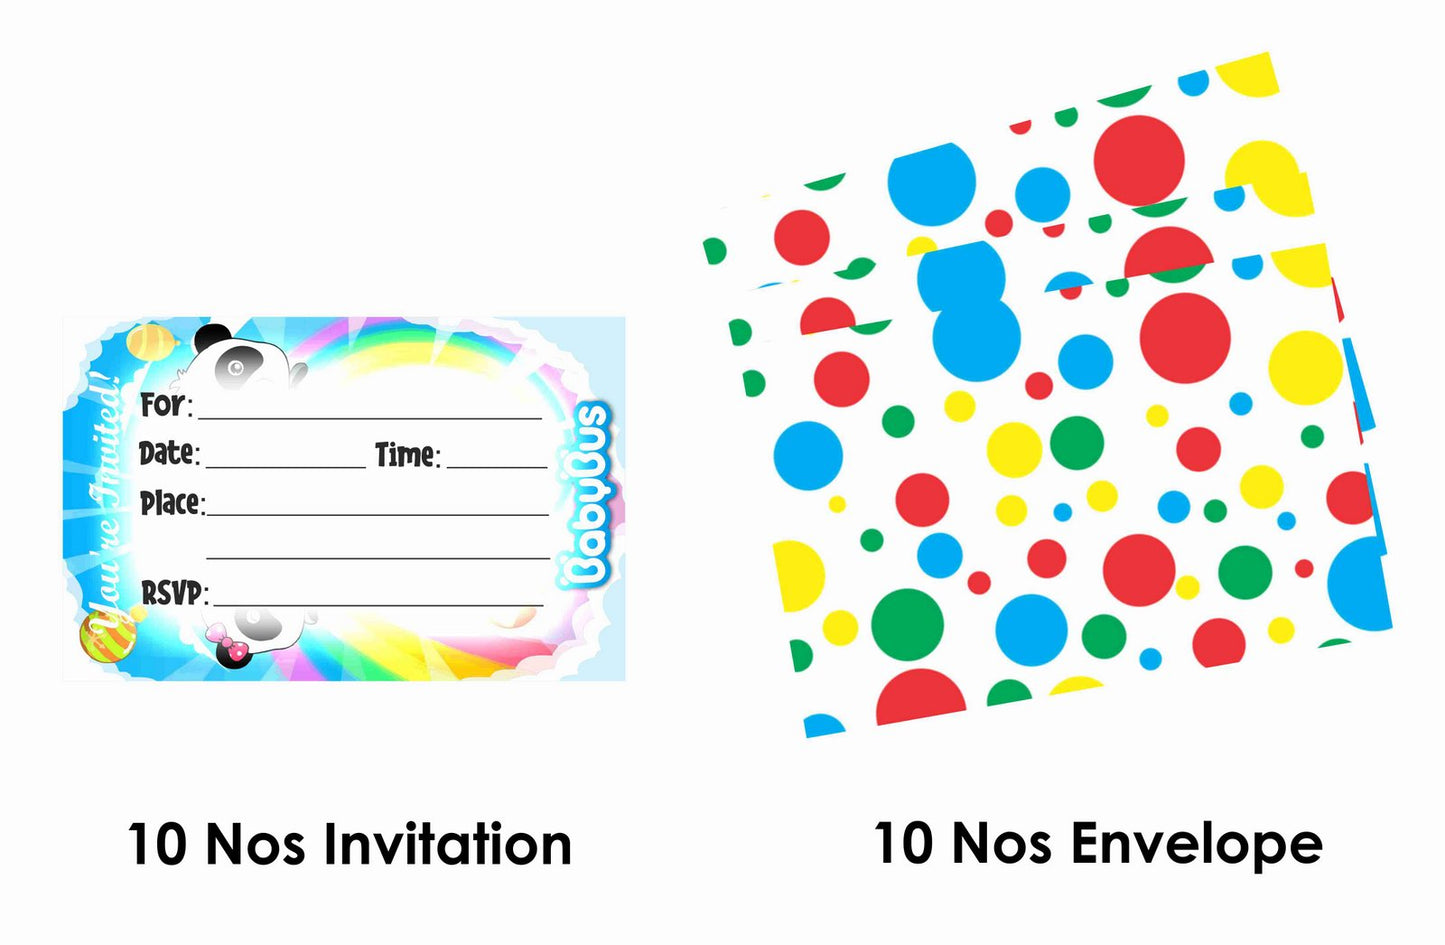 Baby Bus Theme Children's Birthday Party Invitations Cards with Envelopes - Kids Birthday Party Invitations for Boys or Girls,- Invitation Cards (Pack of 10)